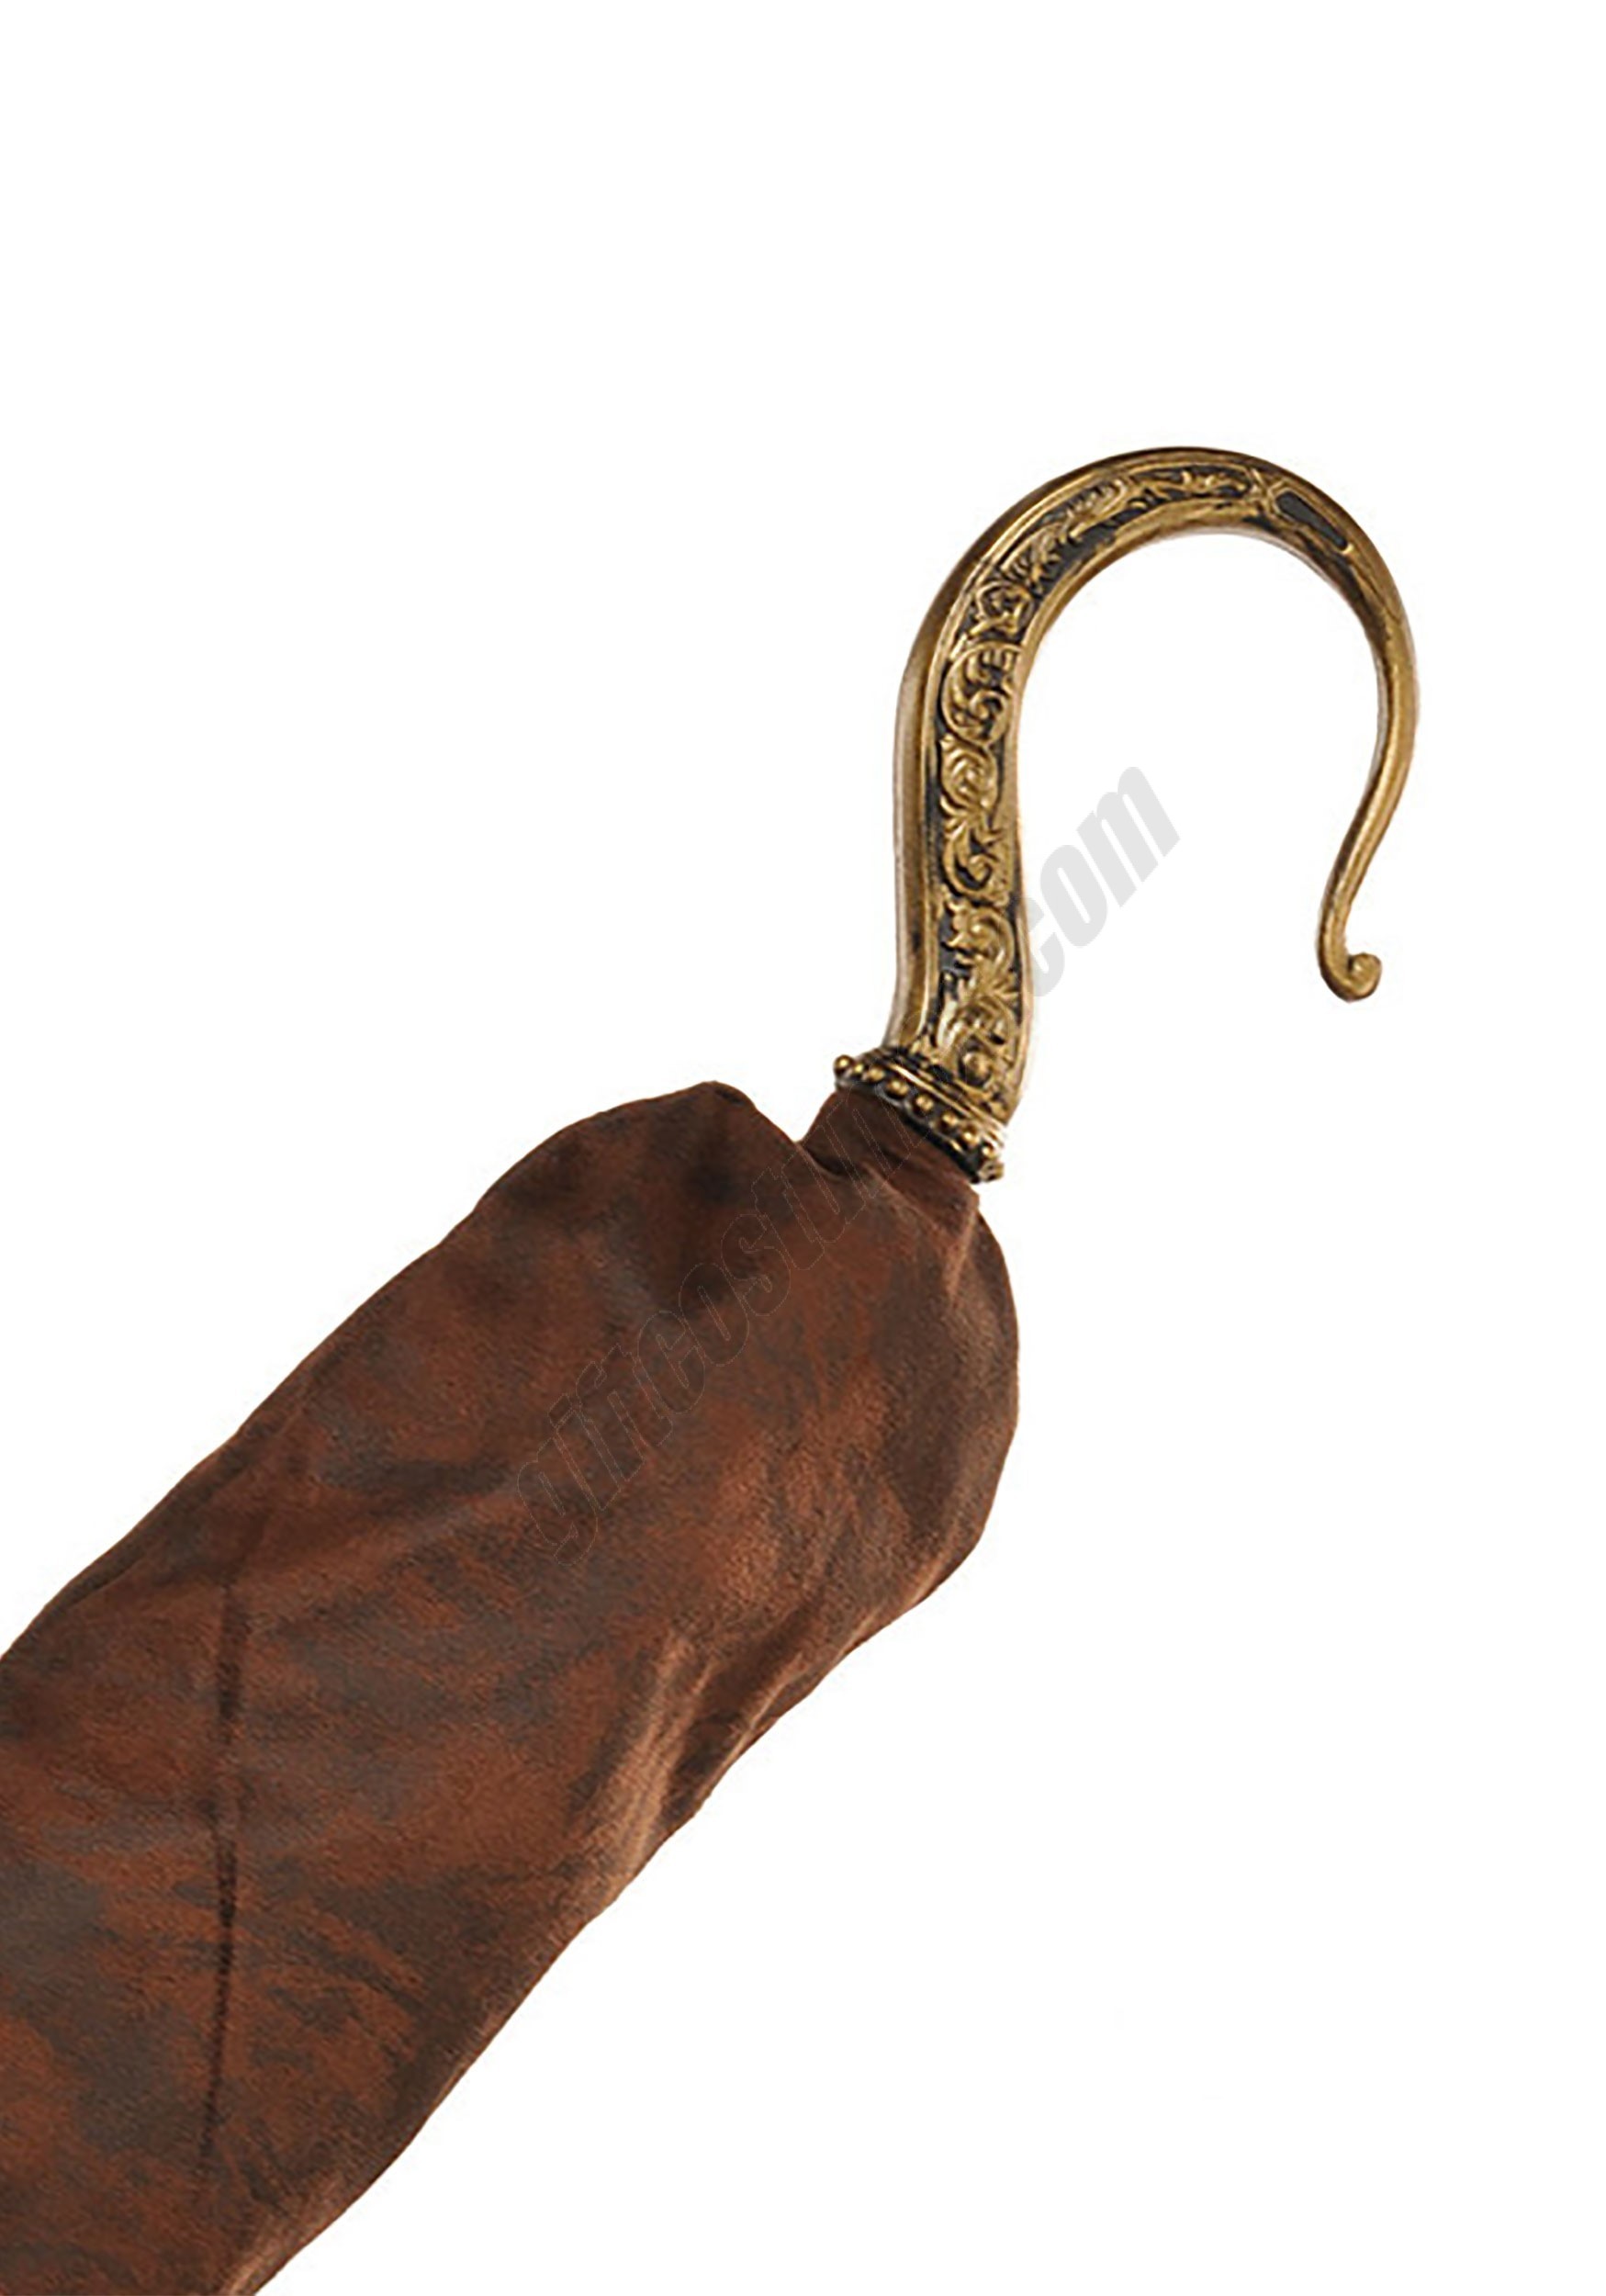 Deluxe Gold Pirate Hook Promotions - Deluxe Gold Pirate Hook Promotions